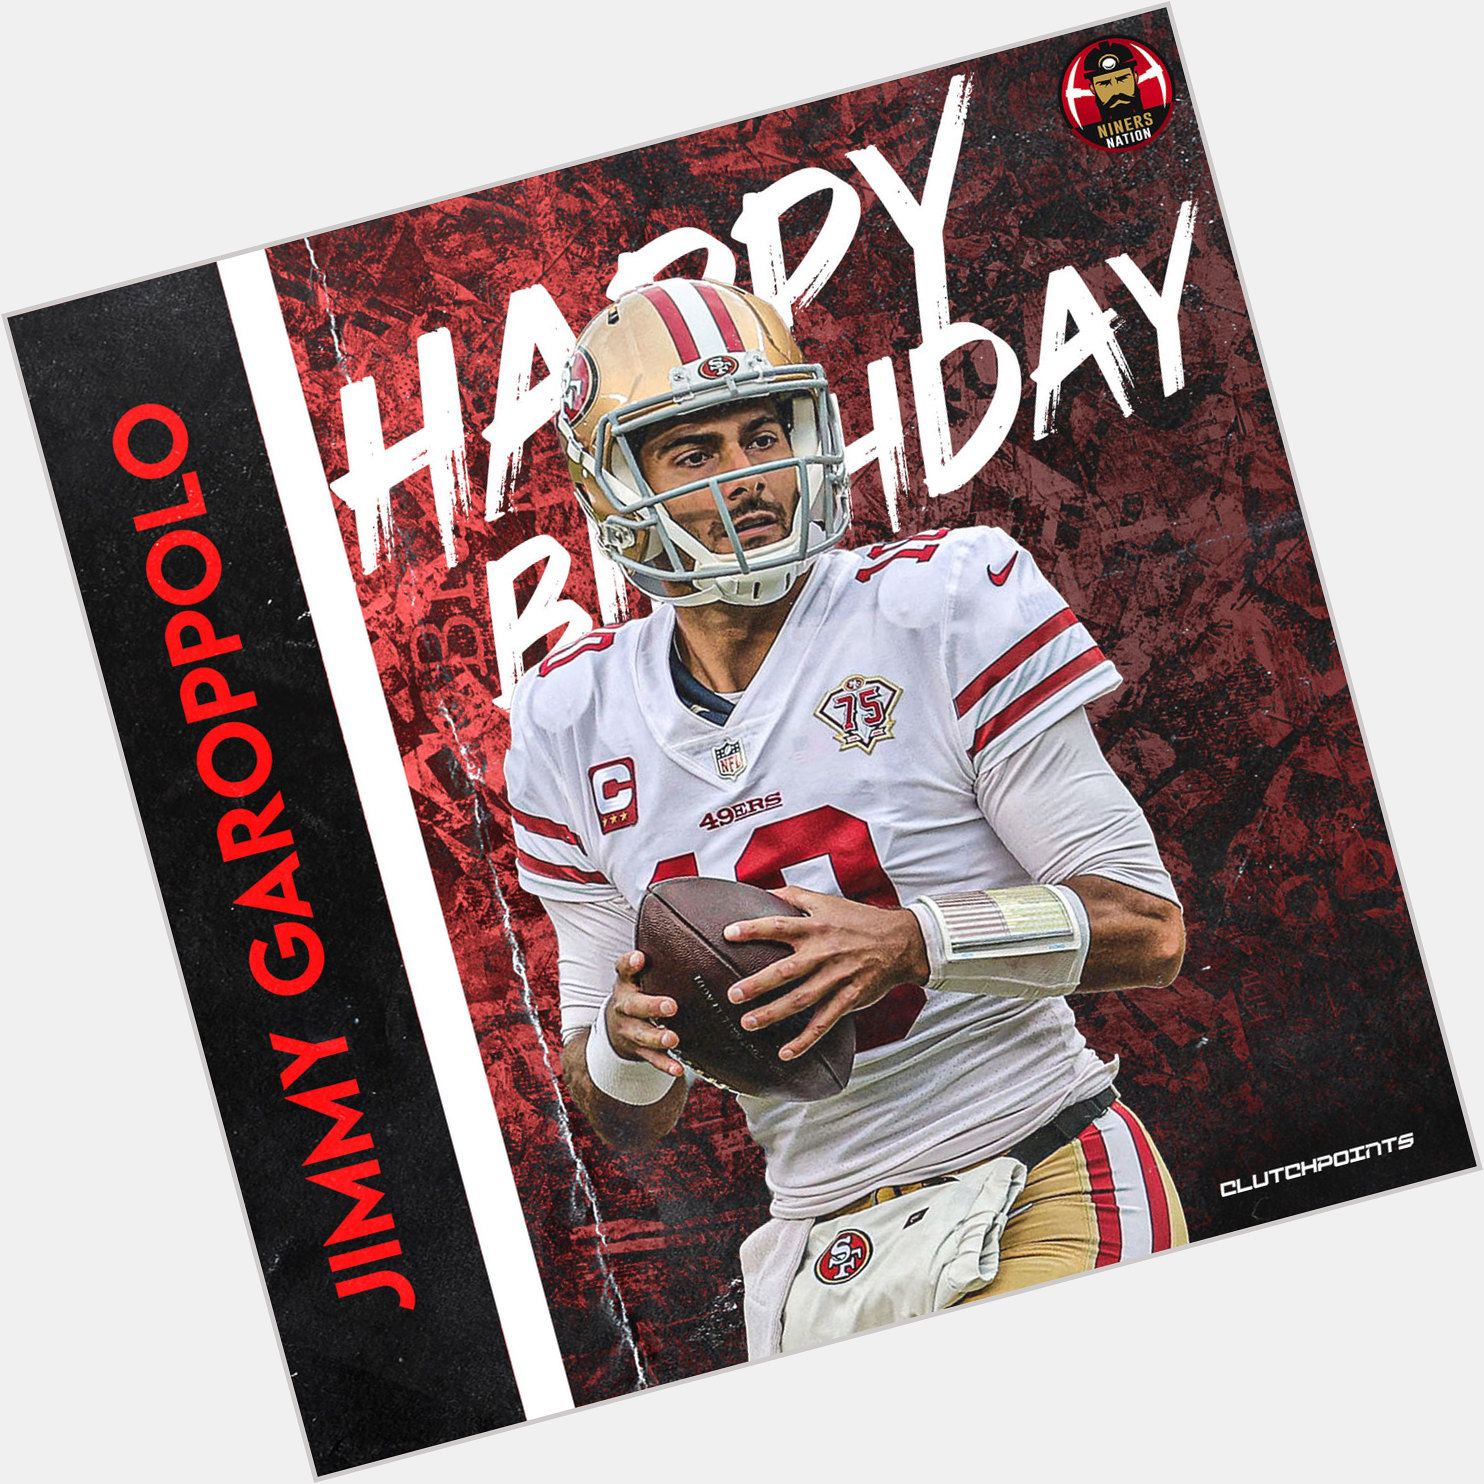 Join 49ers Nation in greeting 2x Super Bowl Champ, Jimmy Garoppolo, a happy 30th birthday! 